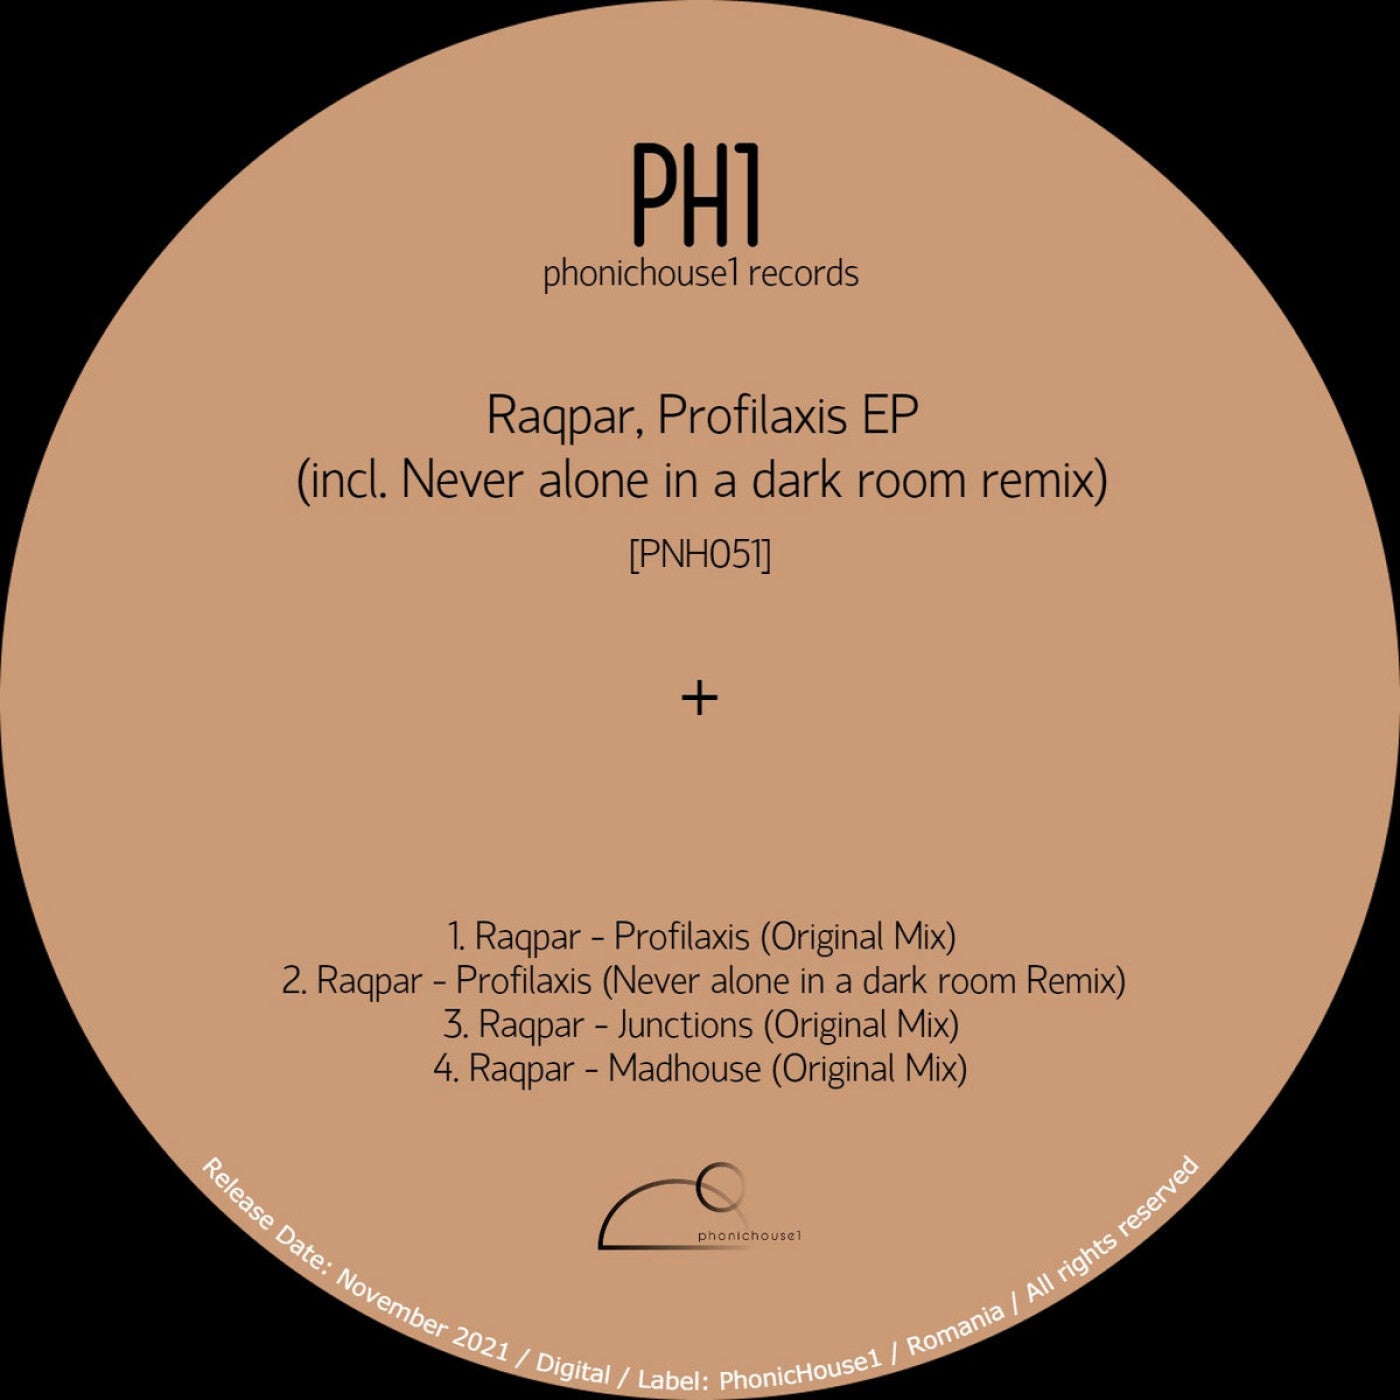 Profilaxis EP (incl. Never Alone In A Dark Room remix)